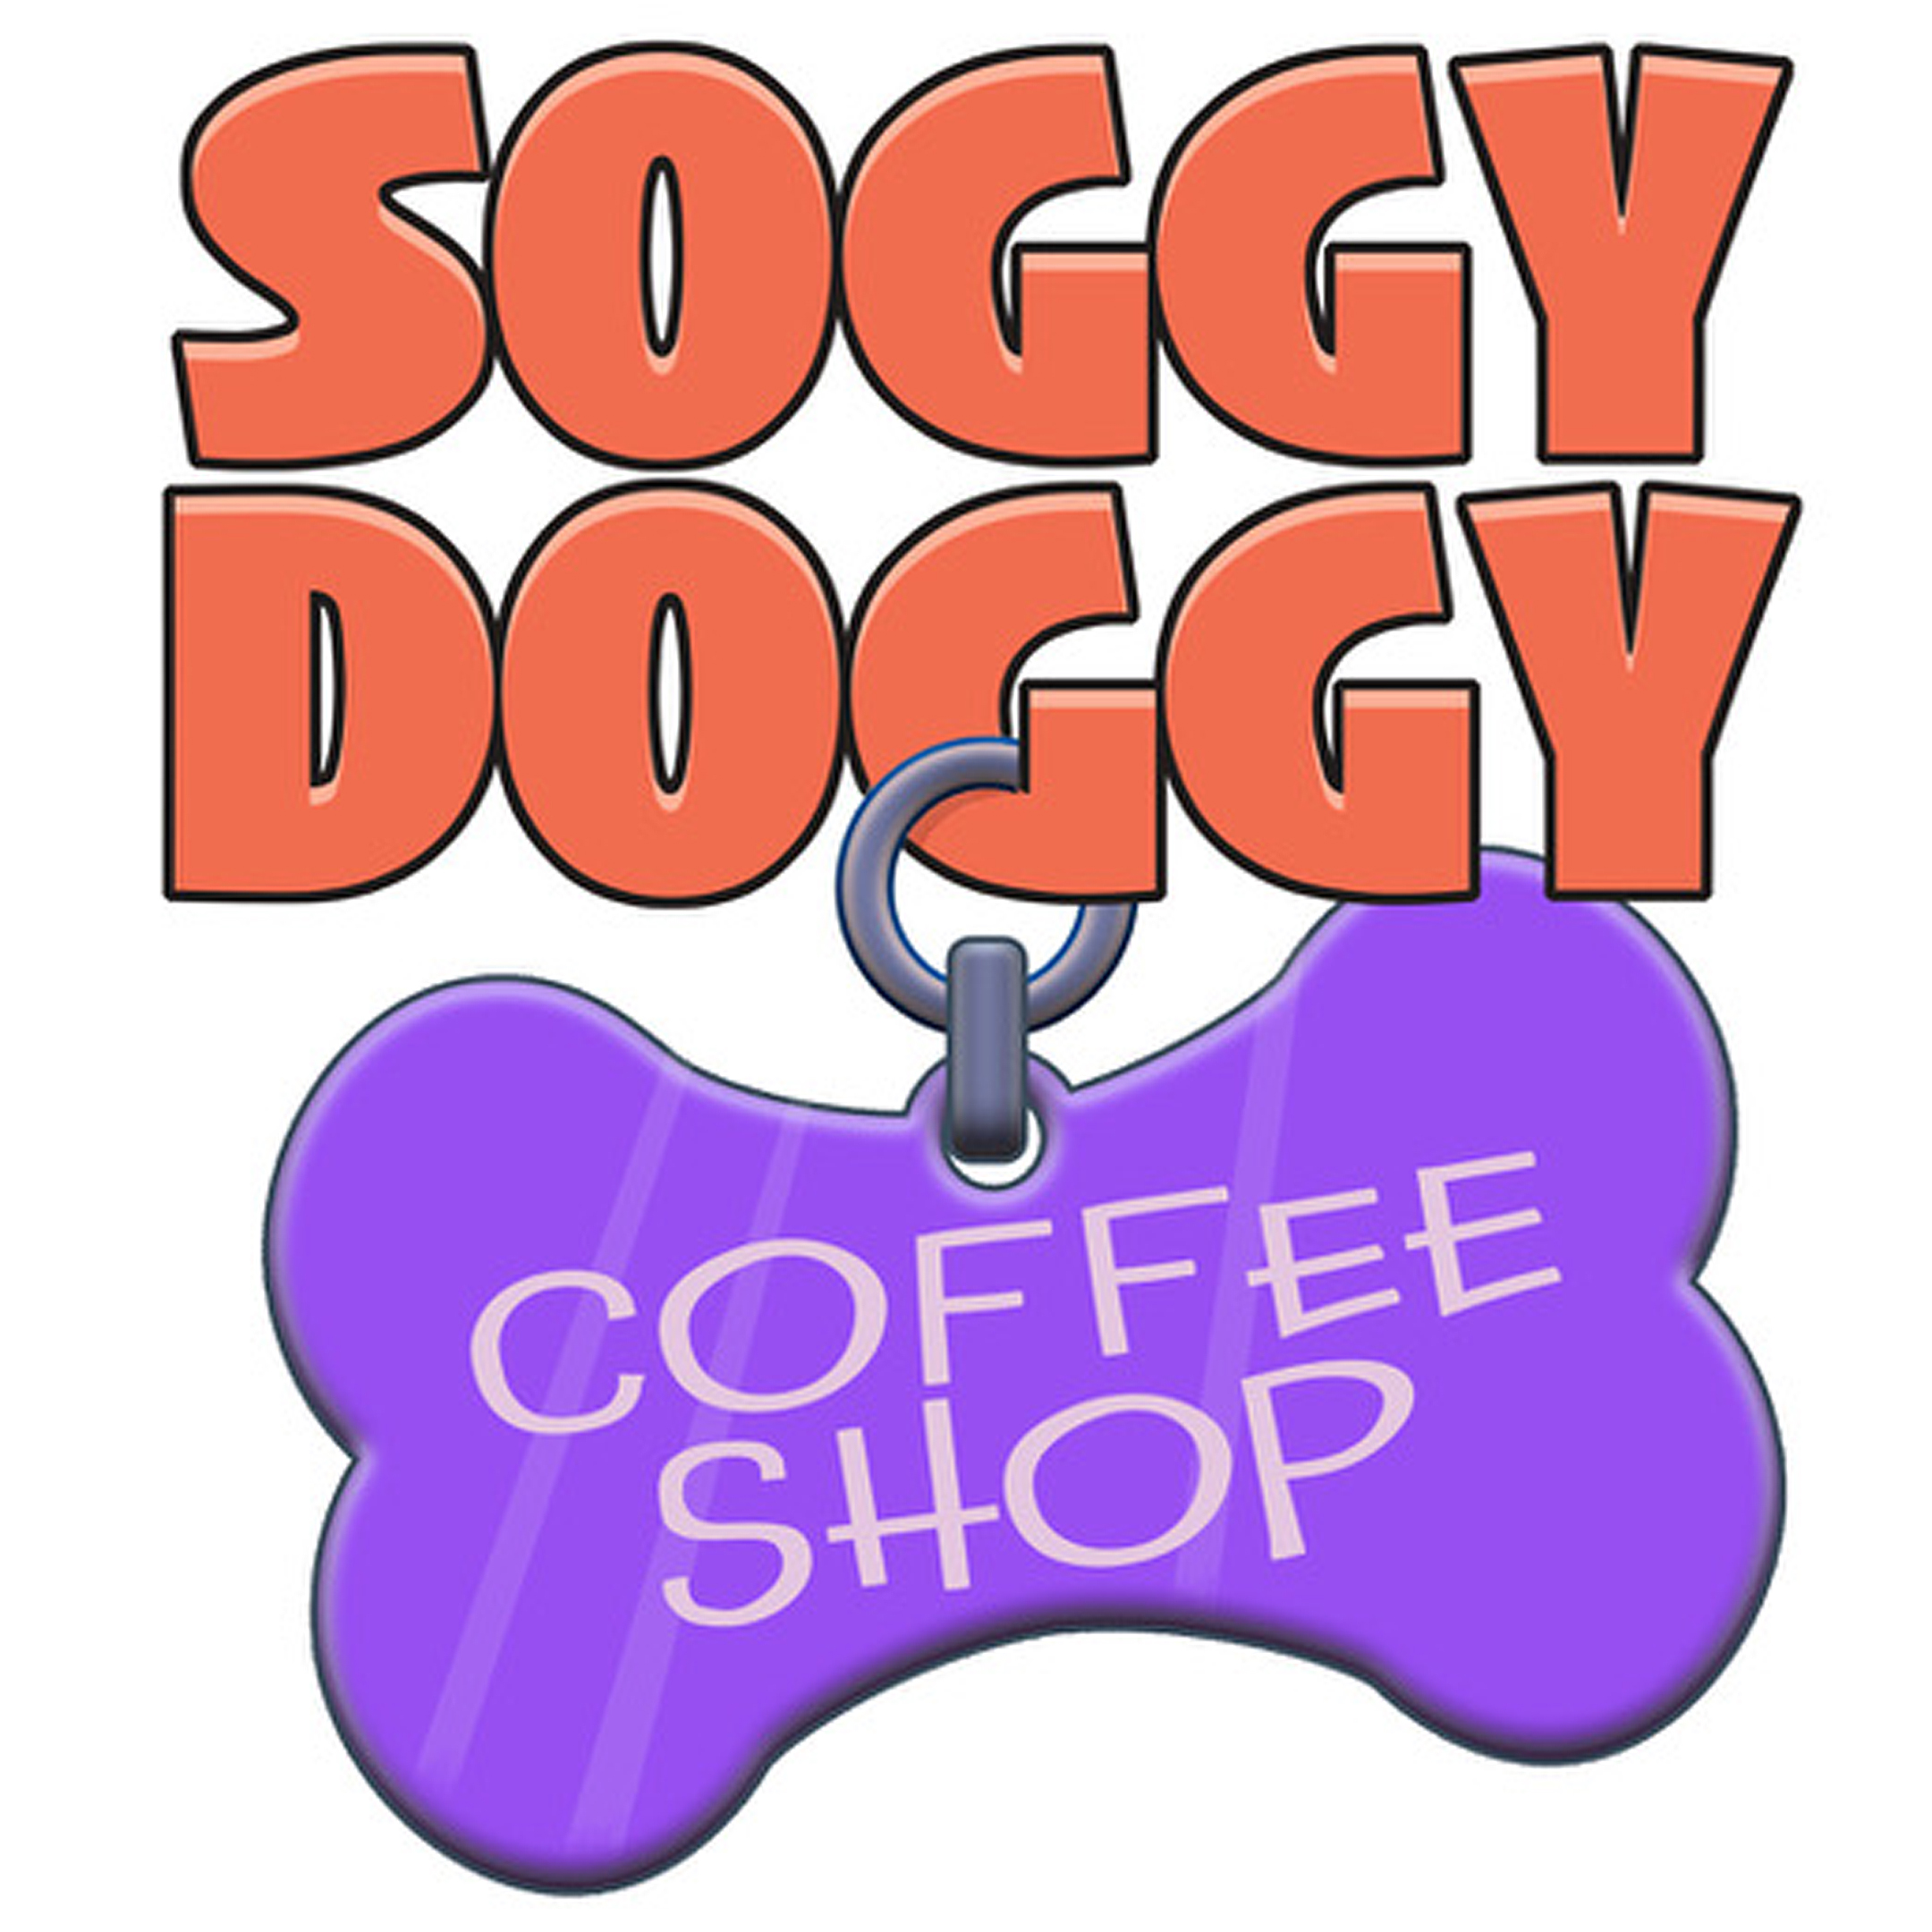 Tales from the Soggy Doggy Coffee Shop